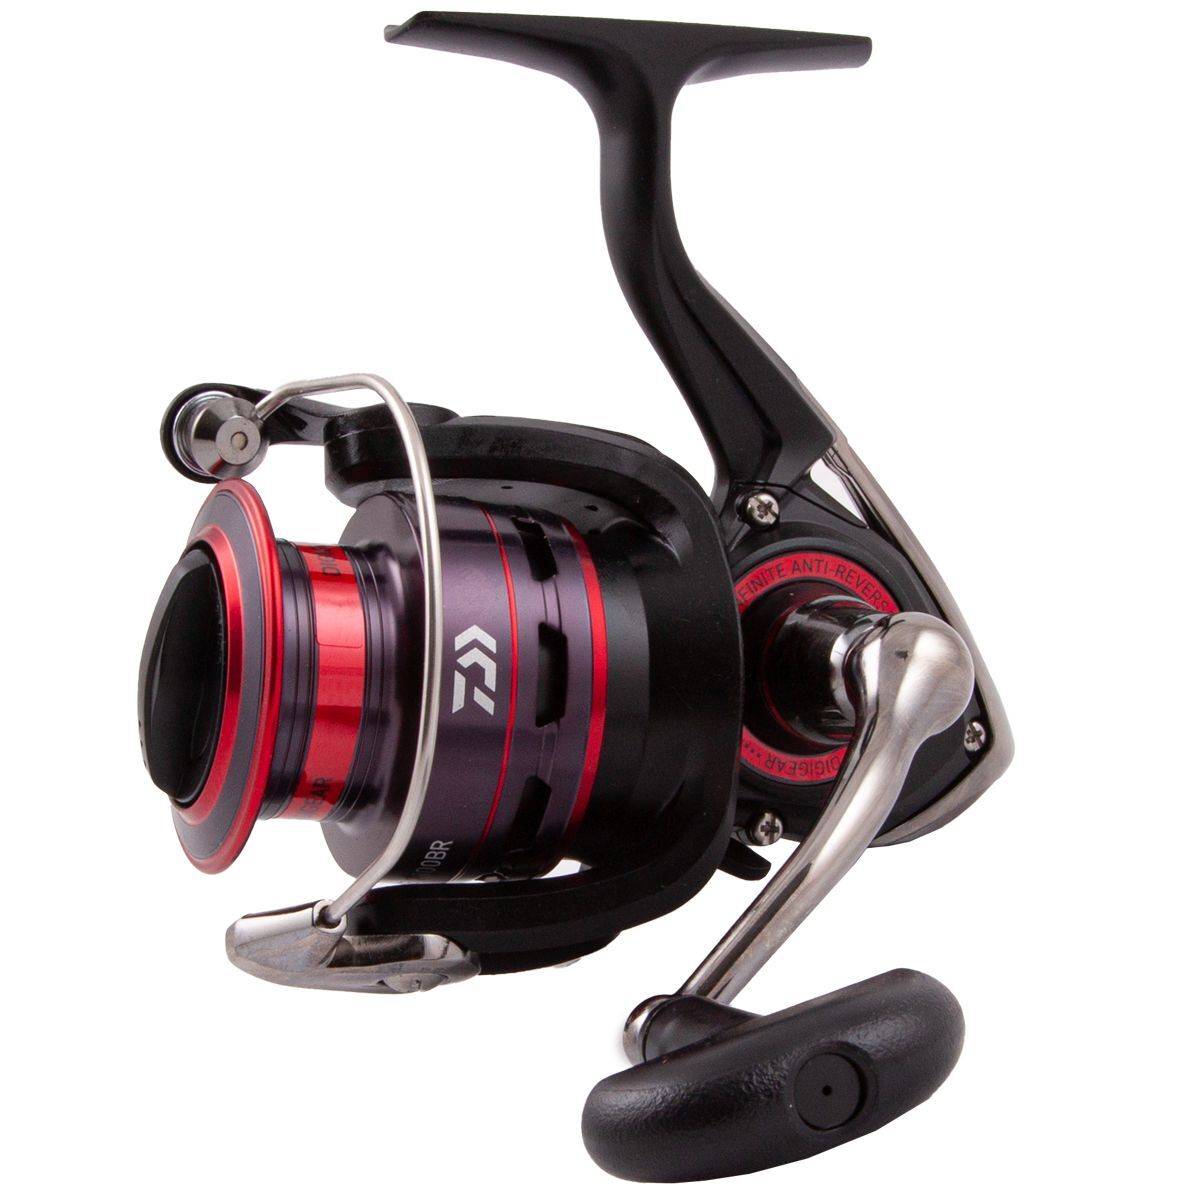 https://www.fishermania.co.uk/images/ww/product/Daiwa%20Crossfire%20Reels%20Black%20And%20Red.jpg